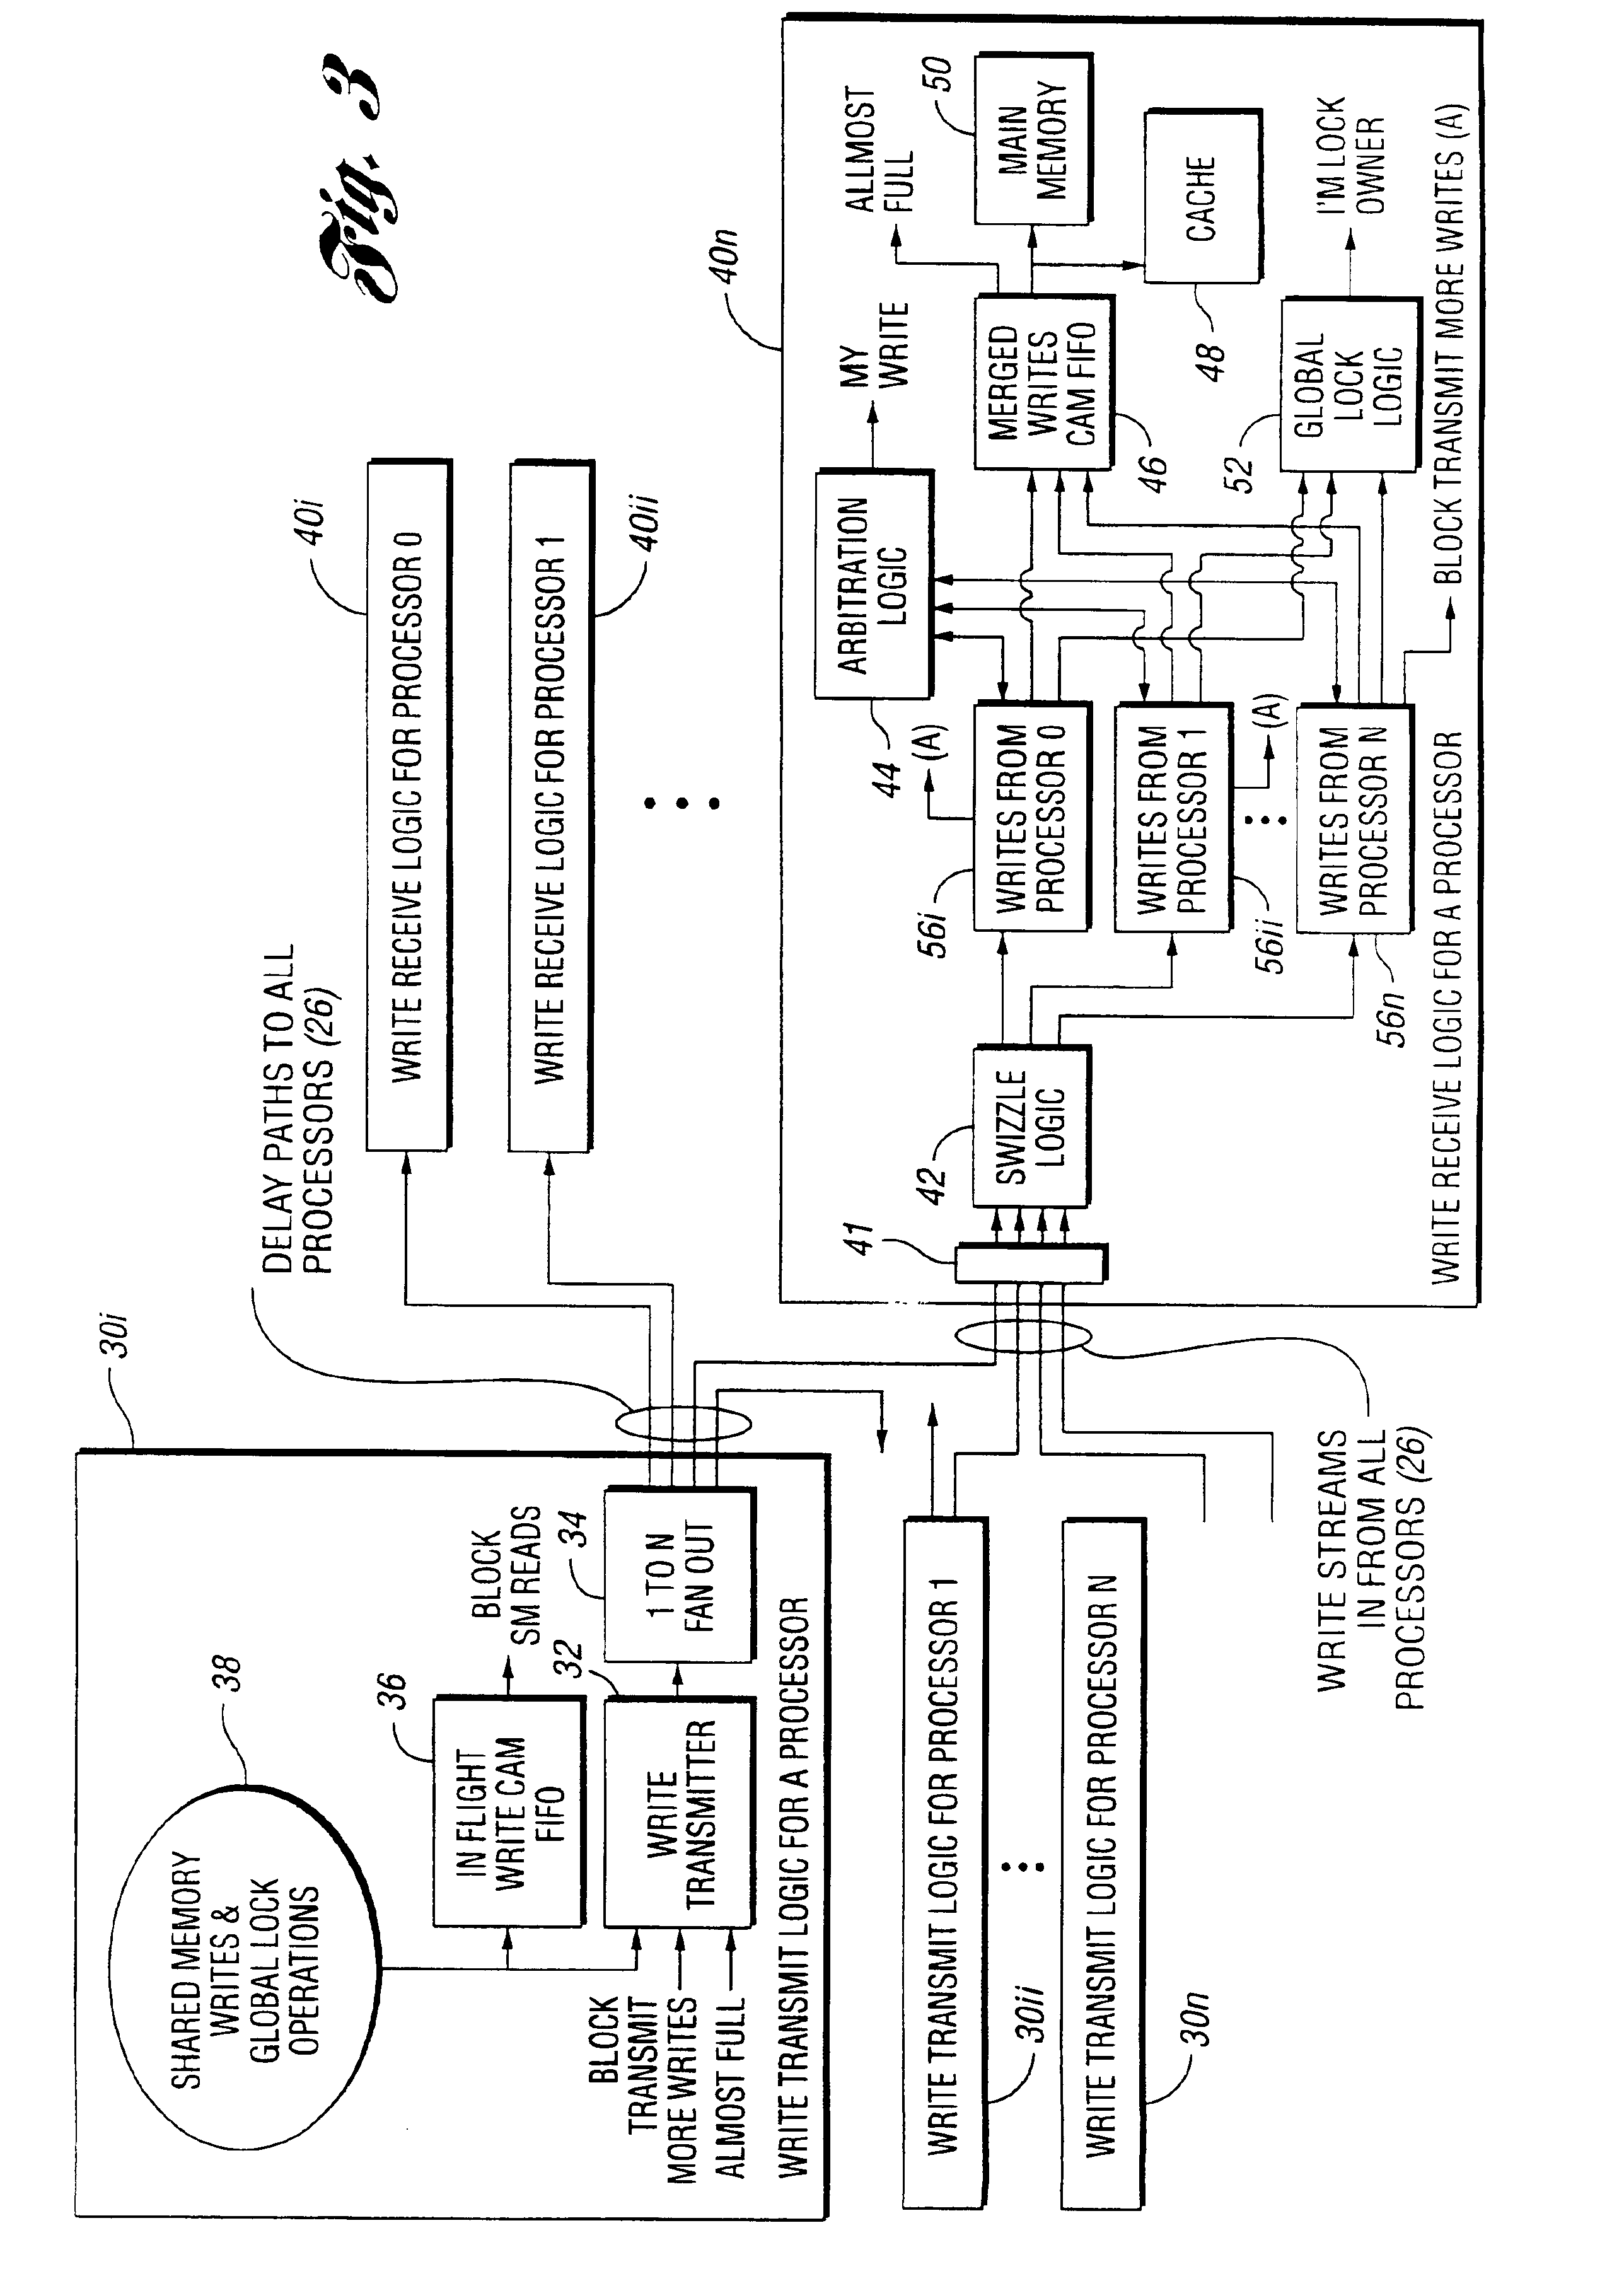 System and method for a distributed shared memory